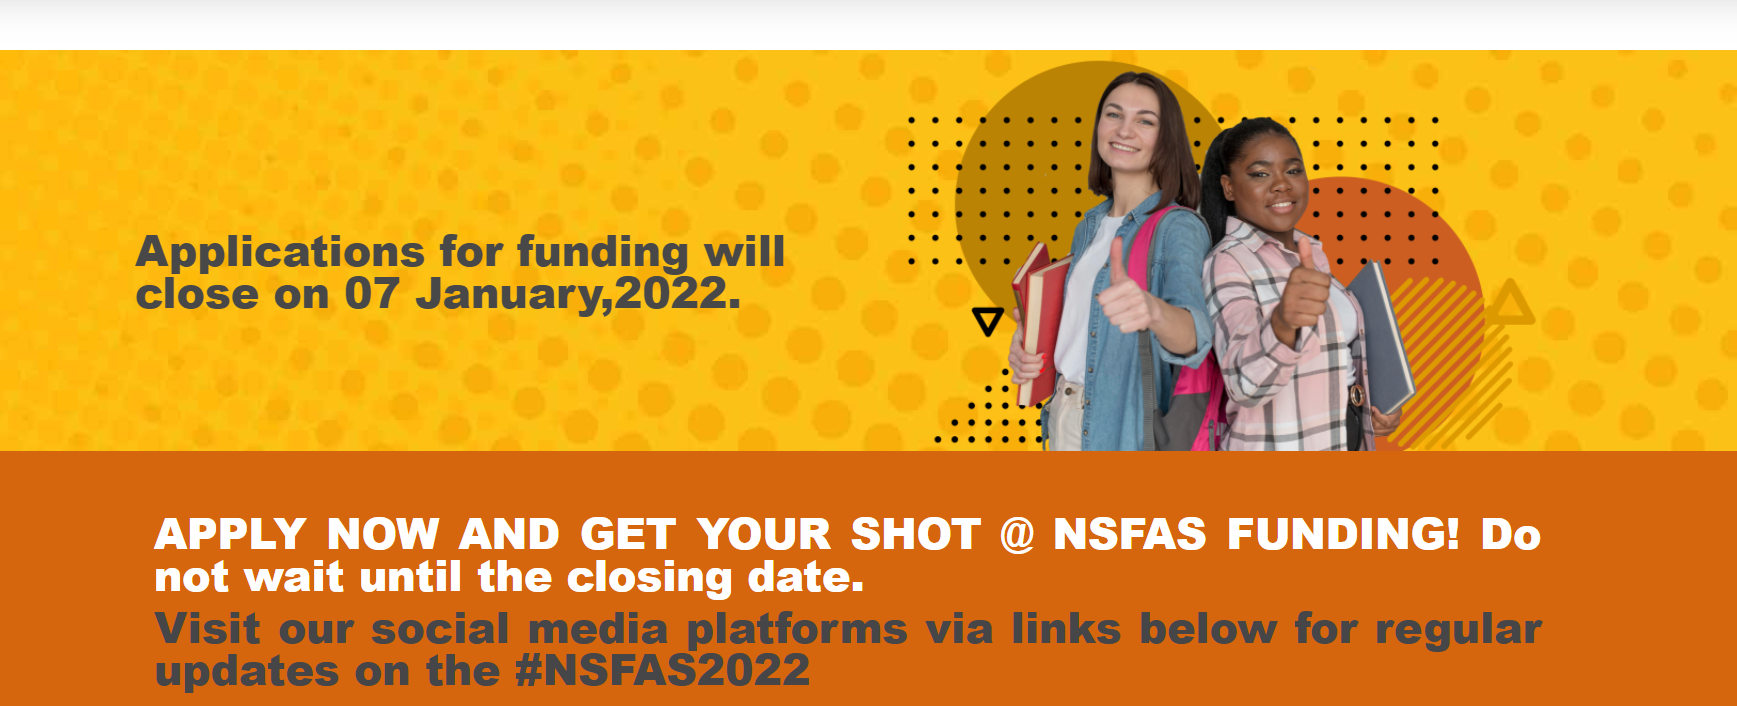 How to download nsfas application form